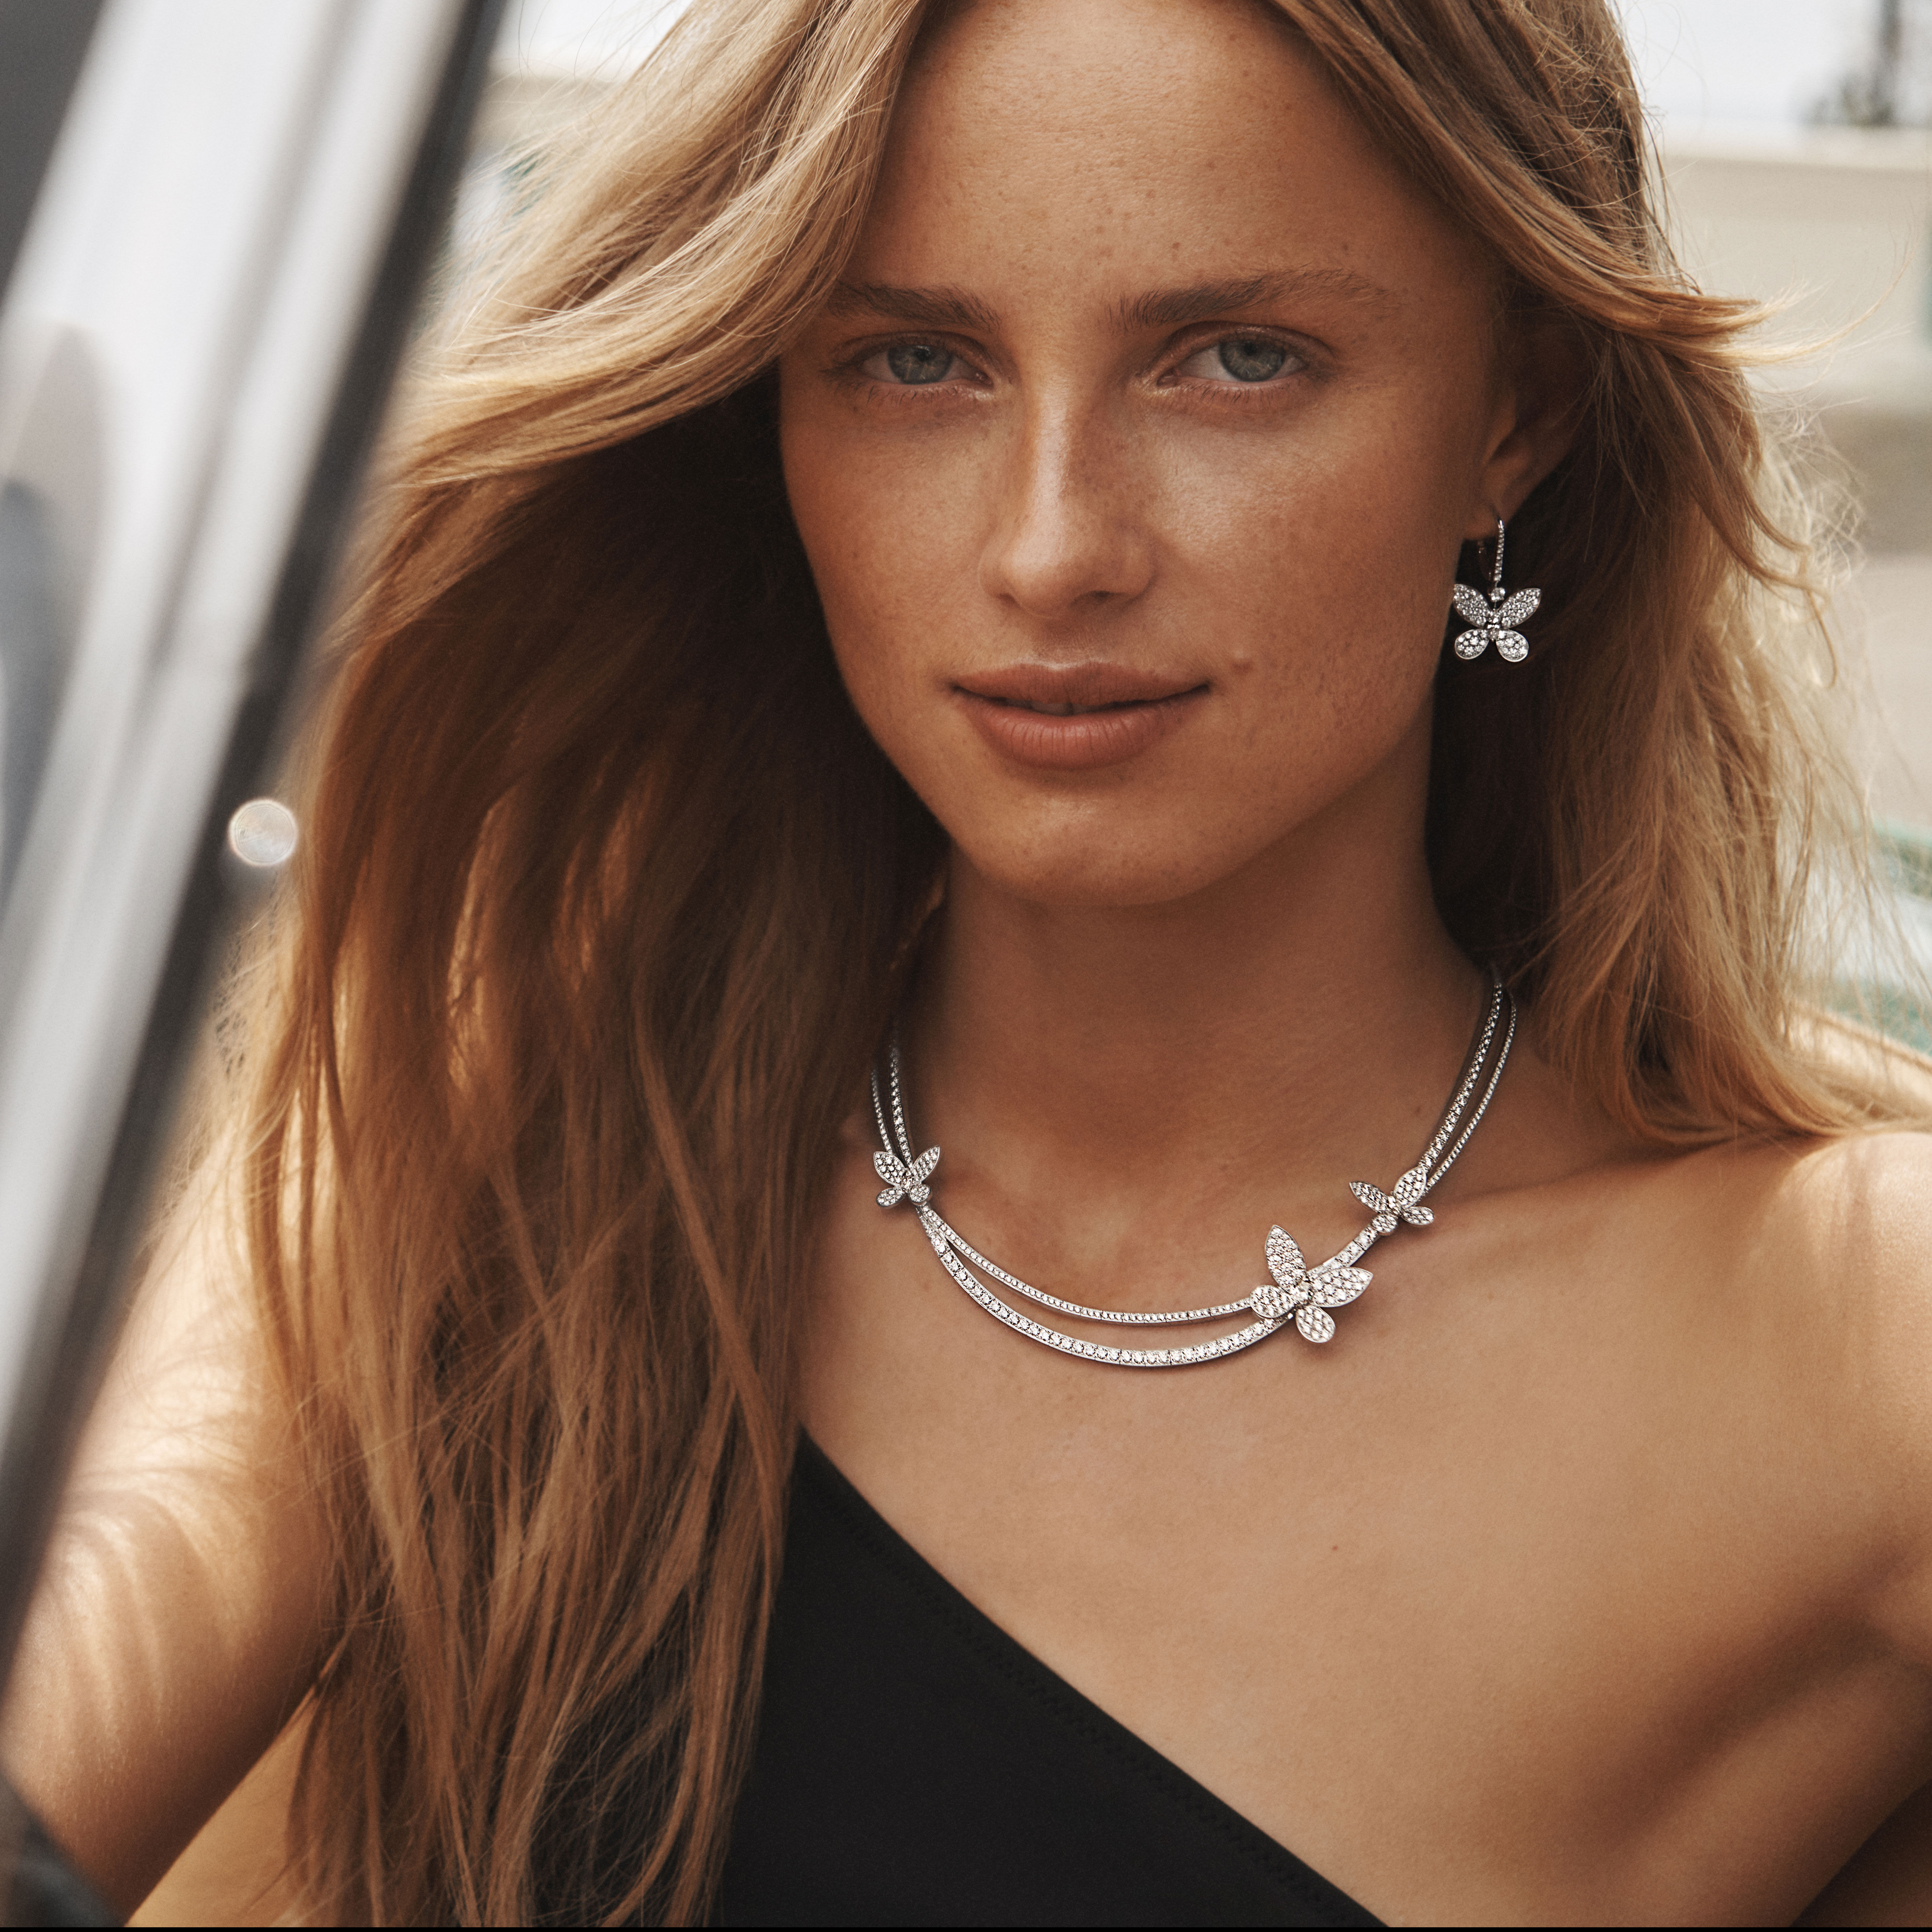 Model wears Butterfly collection white diamond necklace and earrings.